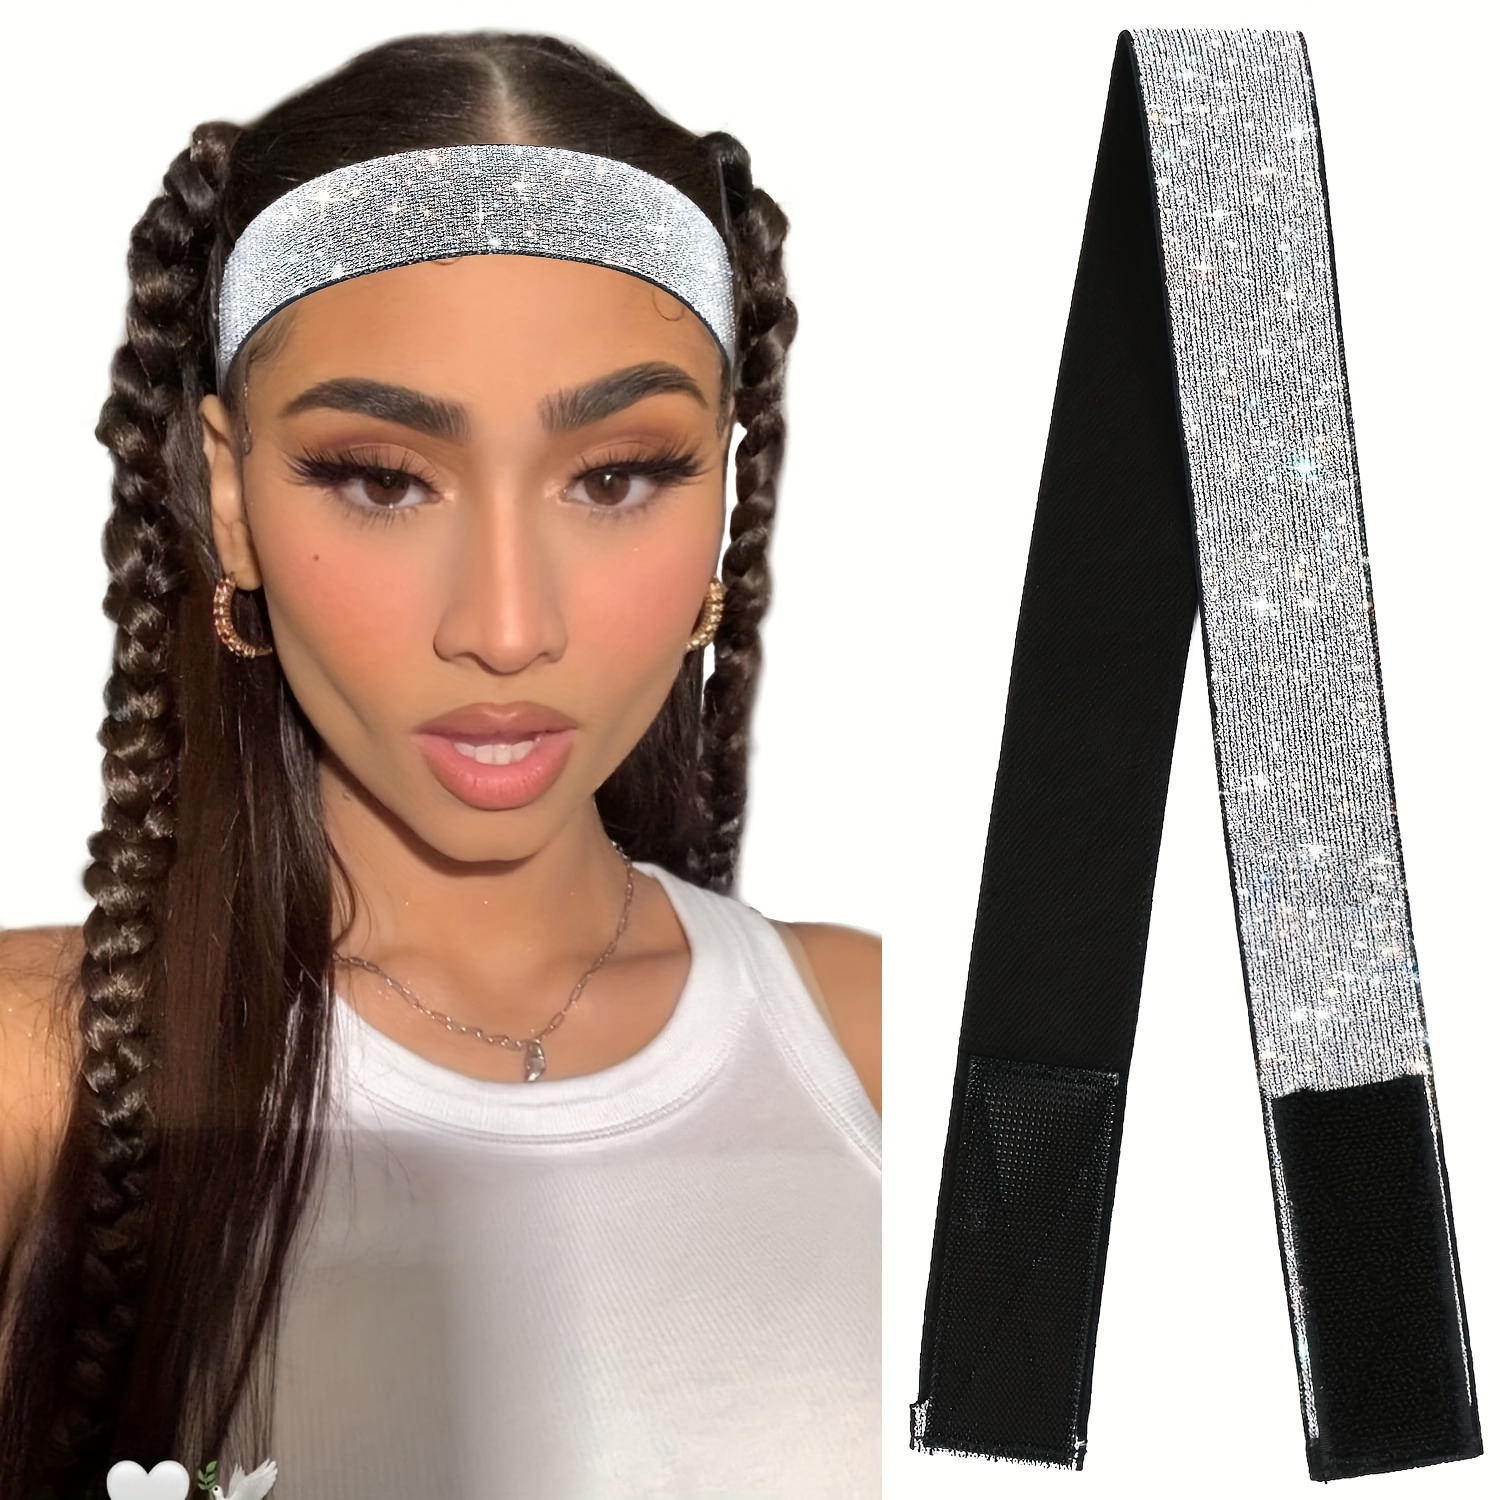 Wig Caps Aliader Hair Elastic Band For Wigs With MagicTape Headband Edge  Laying Scarf Wraps Fixed Lace 230630 From Xing07, $7.38